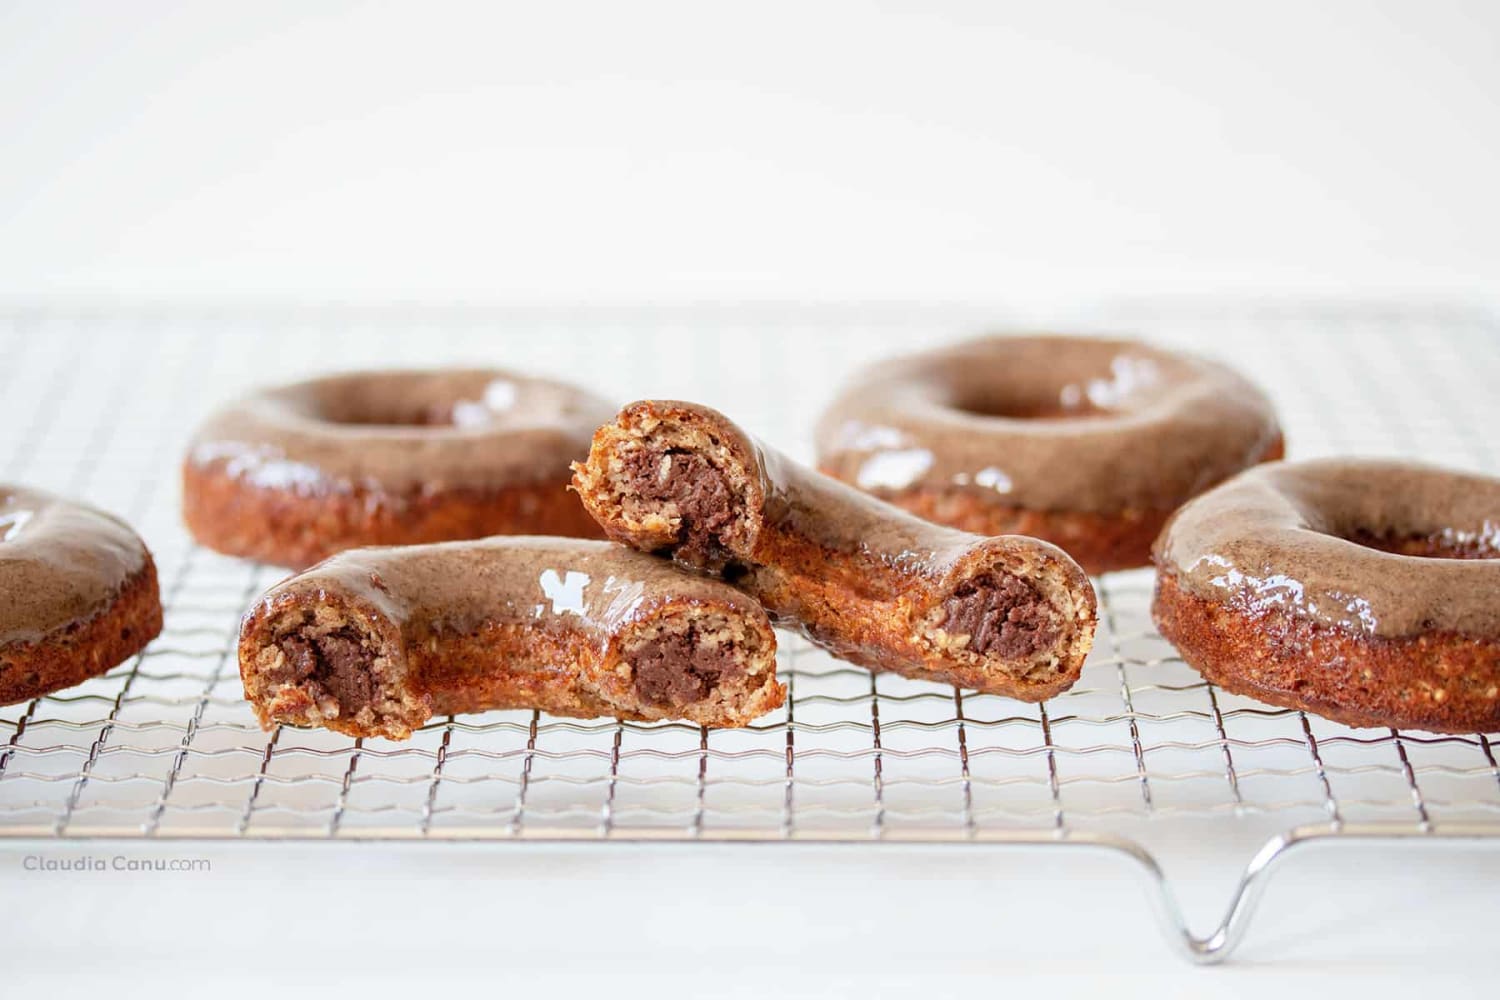 Baked Donuts Filled With Healthy Nutella (VIDEO)